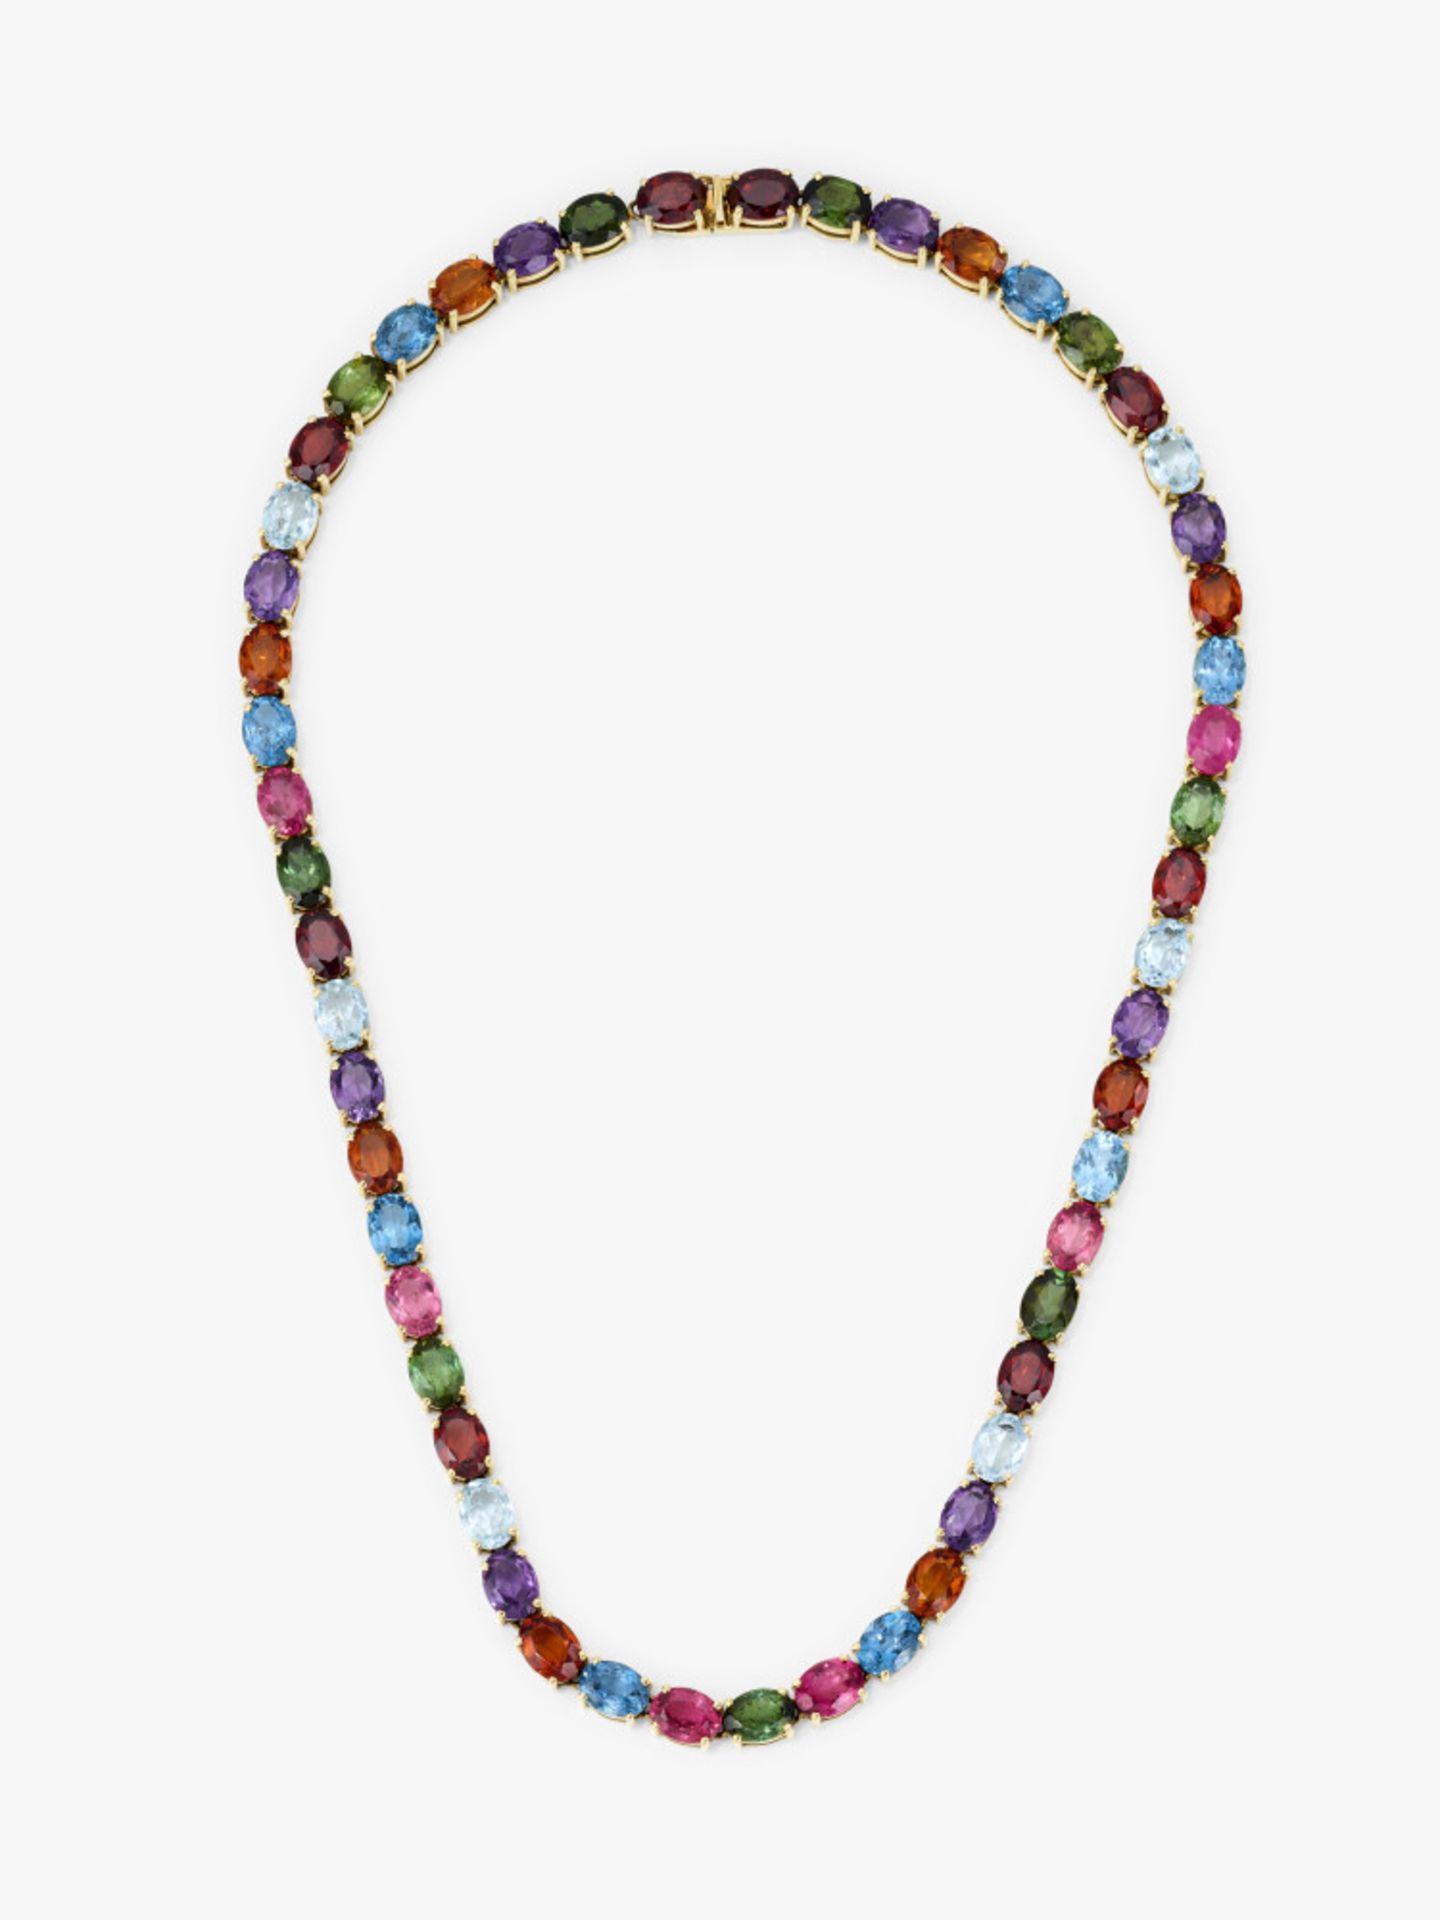 A necklace and bracelet - Necklace: circa 1989, HORST STERN  - Image 2 of 5